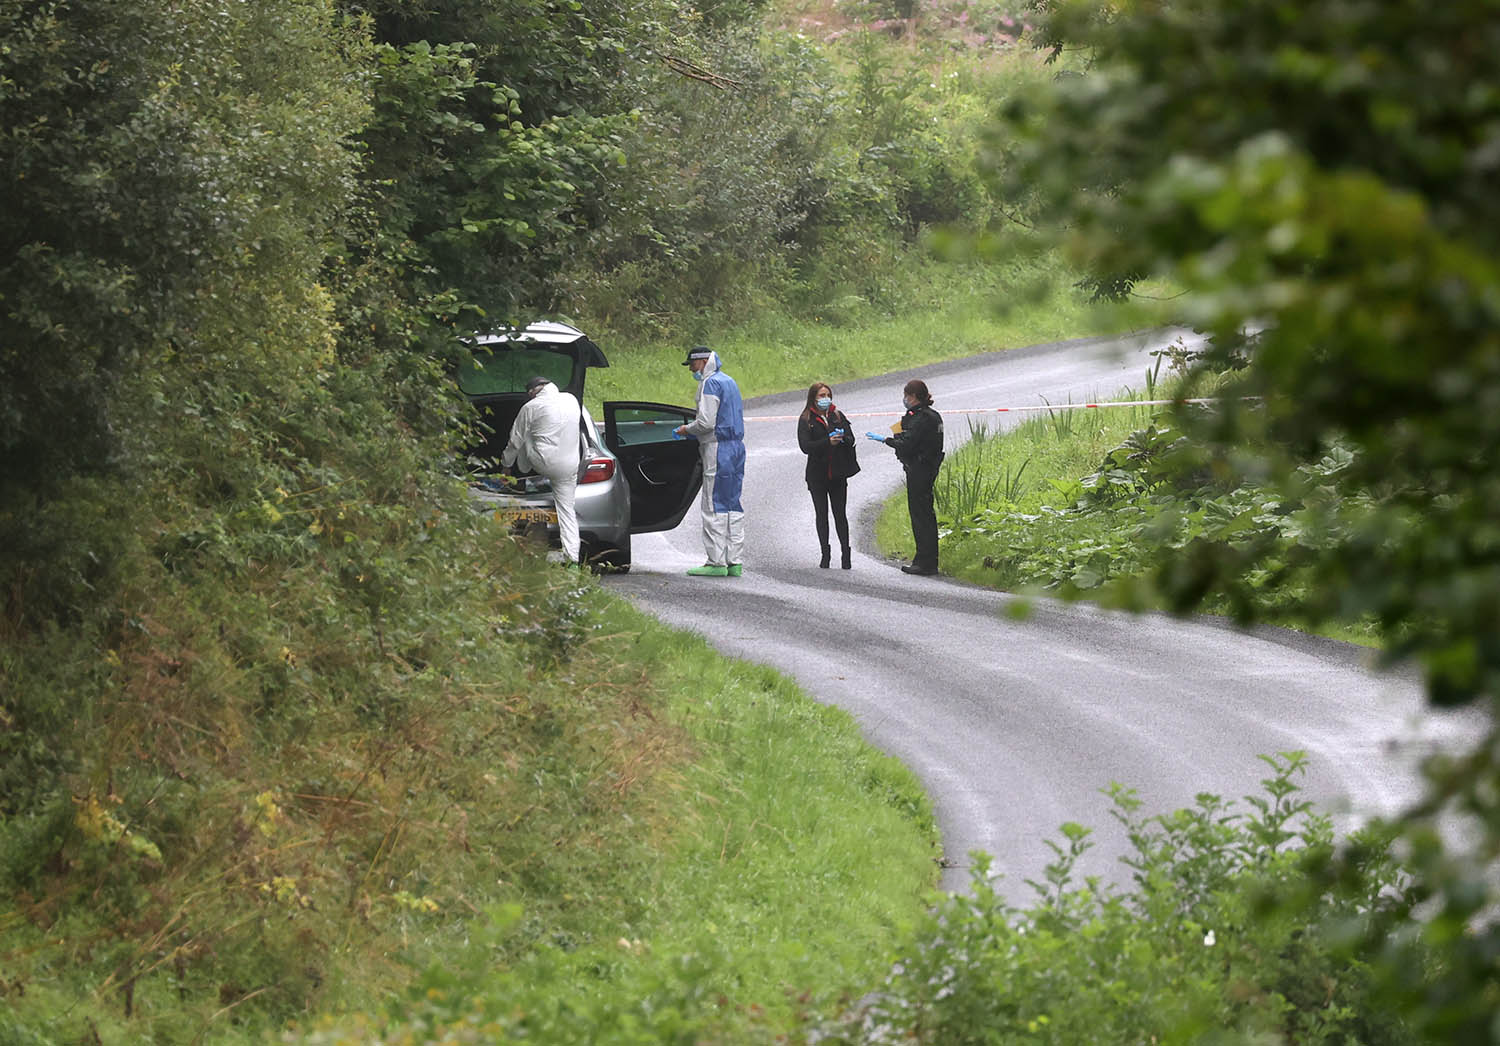 Police in Fermanagh investigating discovery of body in van